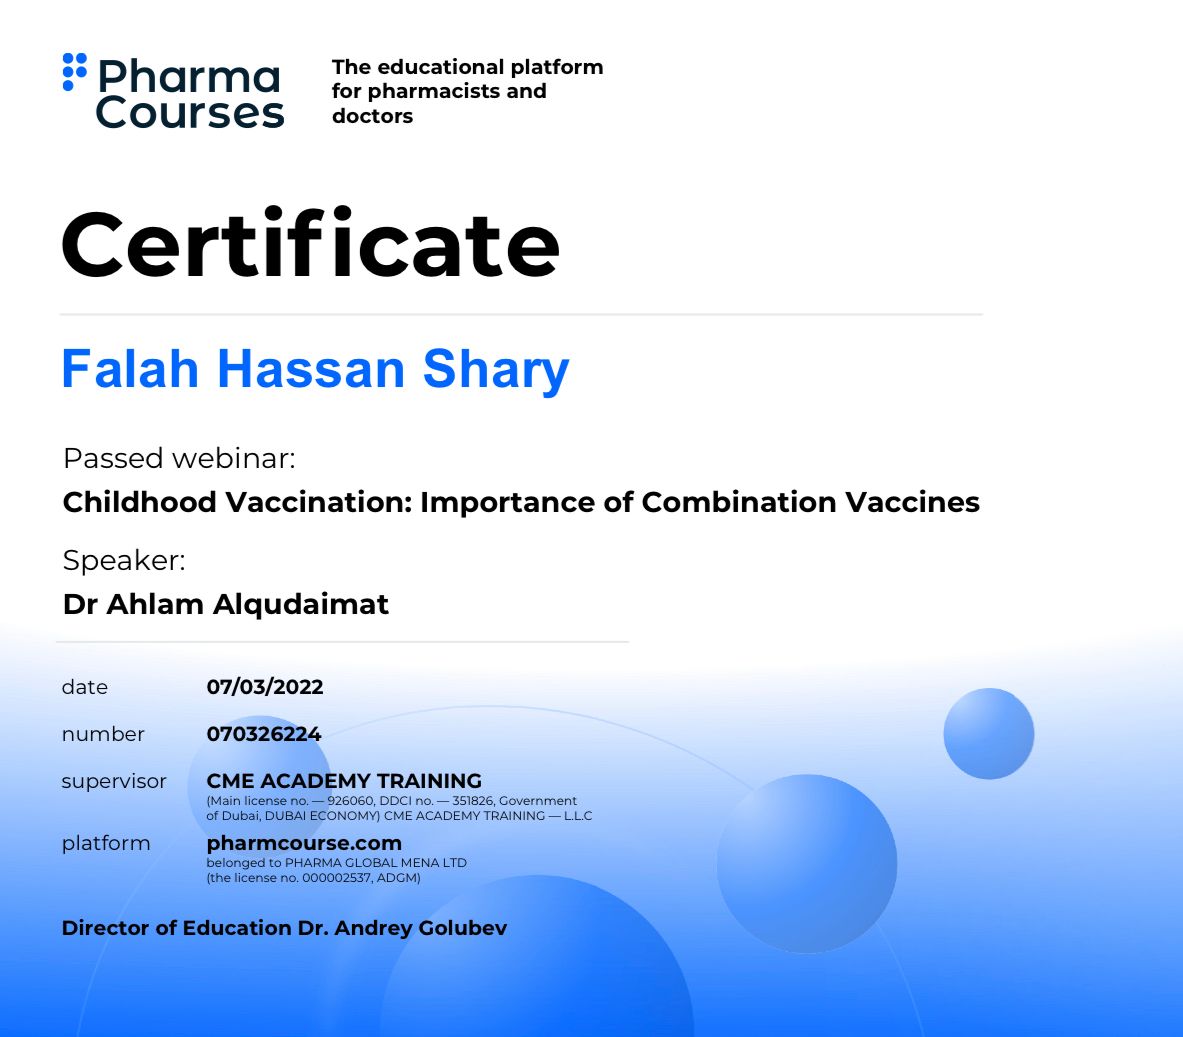 A faculty member at the College of Pharmacy receives a certificate of participation in a scientific workshop on the importance of children's vaccinations